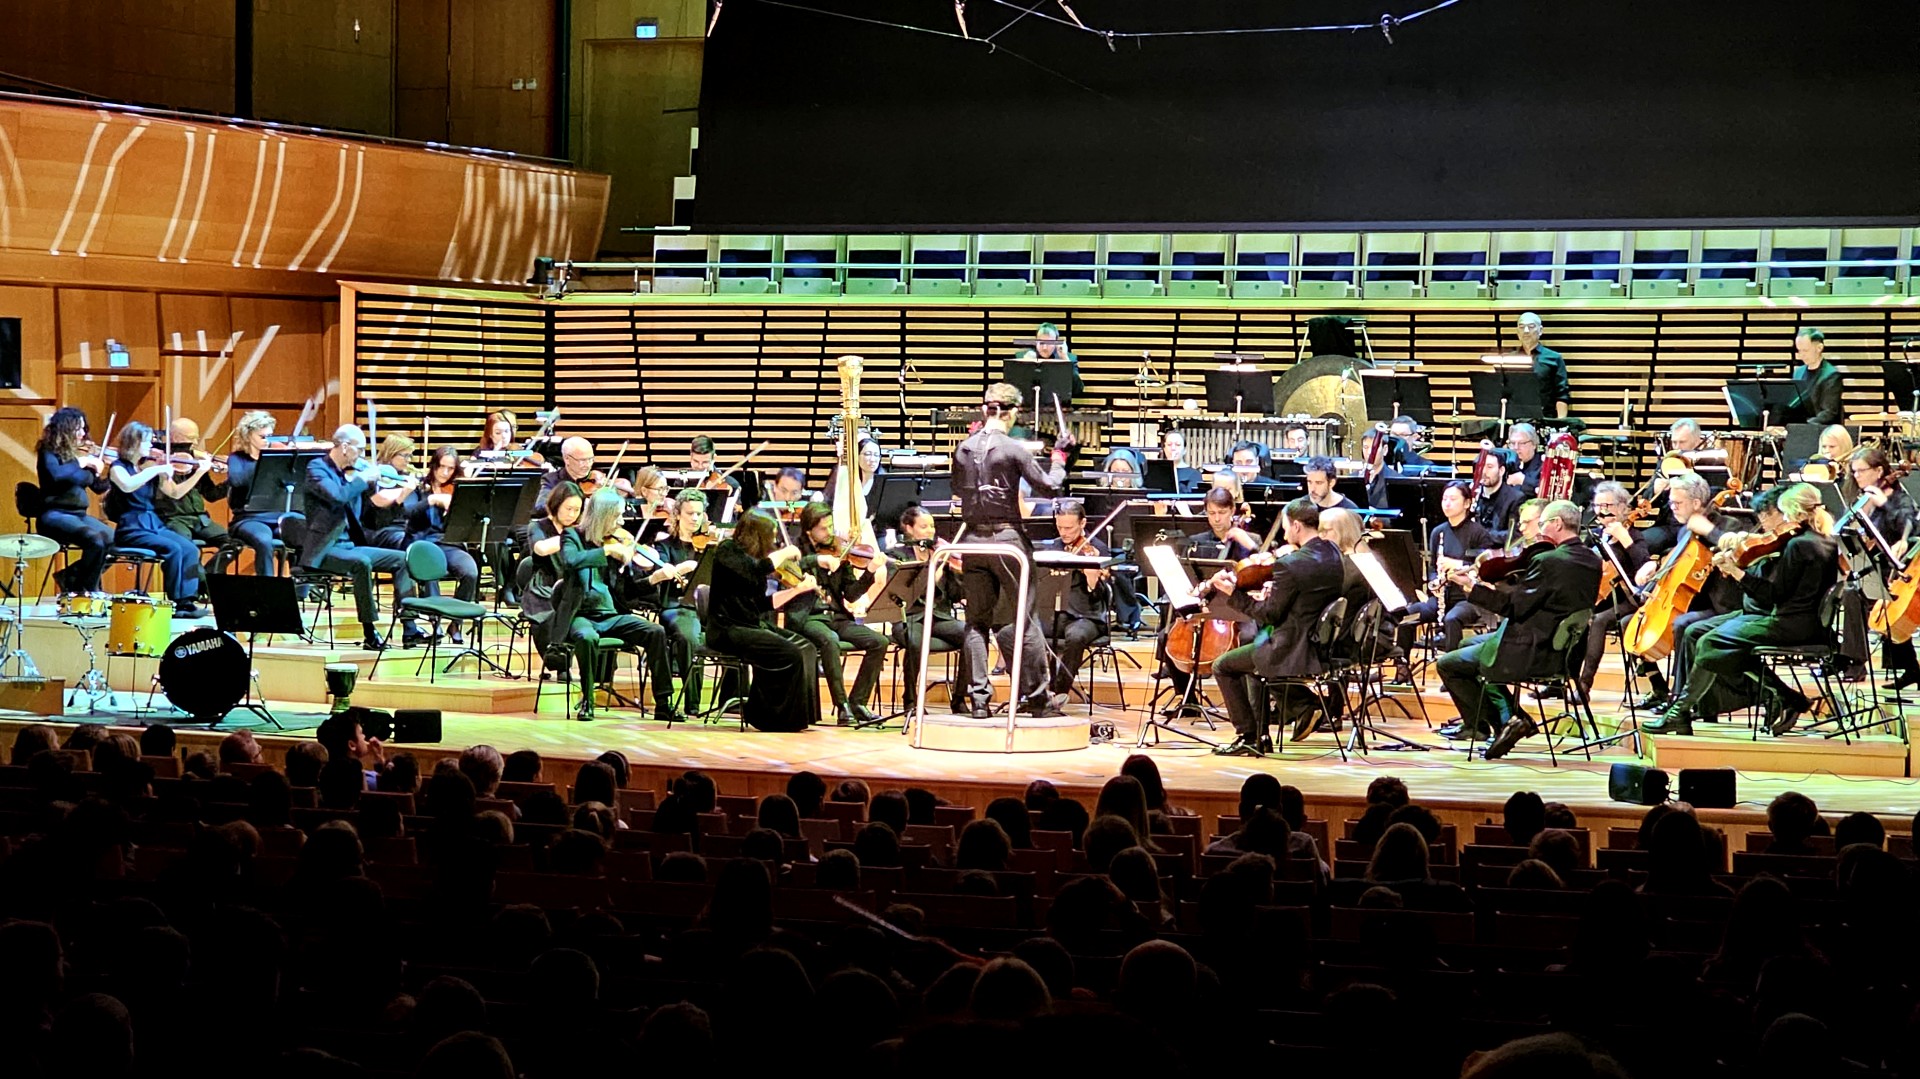 In February each year, the Stavanger Symphony Orchestra organises Lydo, a concert series targeting children and young people. RITMO was able to join the project and collect data while also doing research dissemination during concerts.